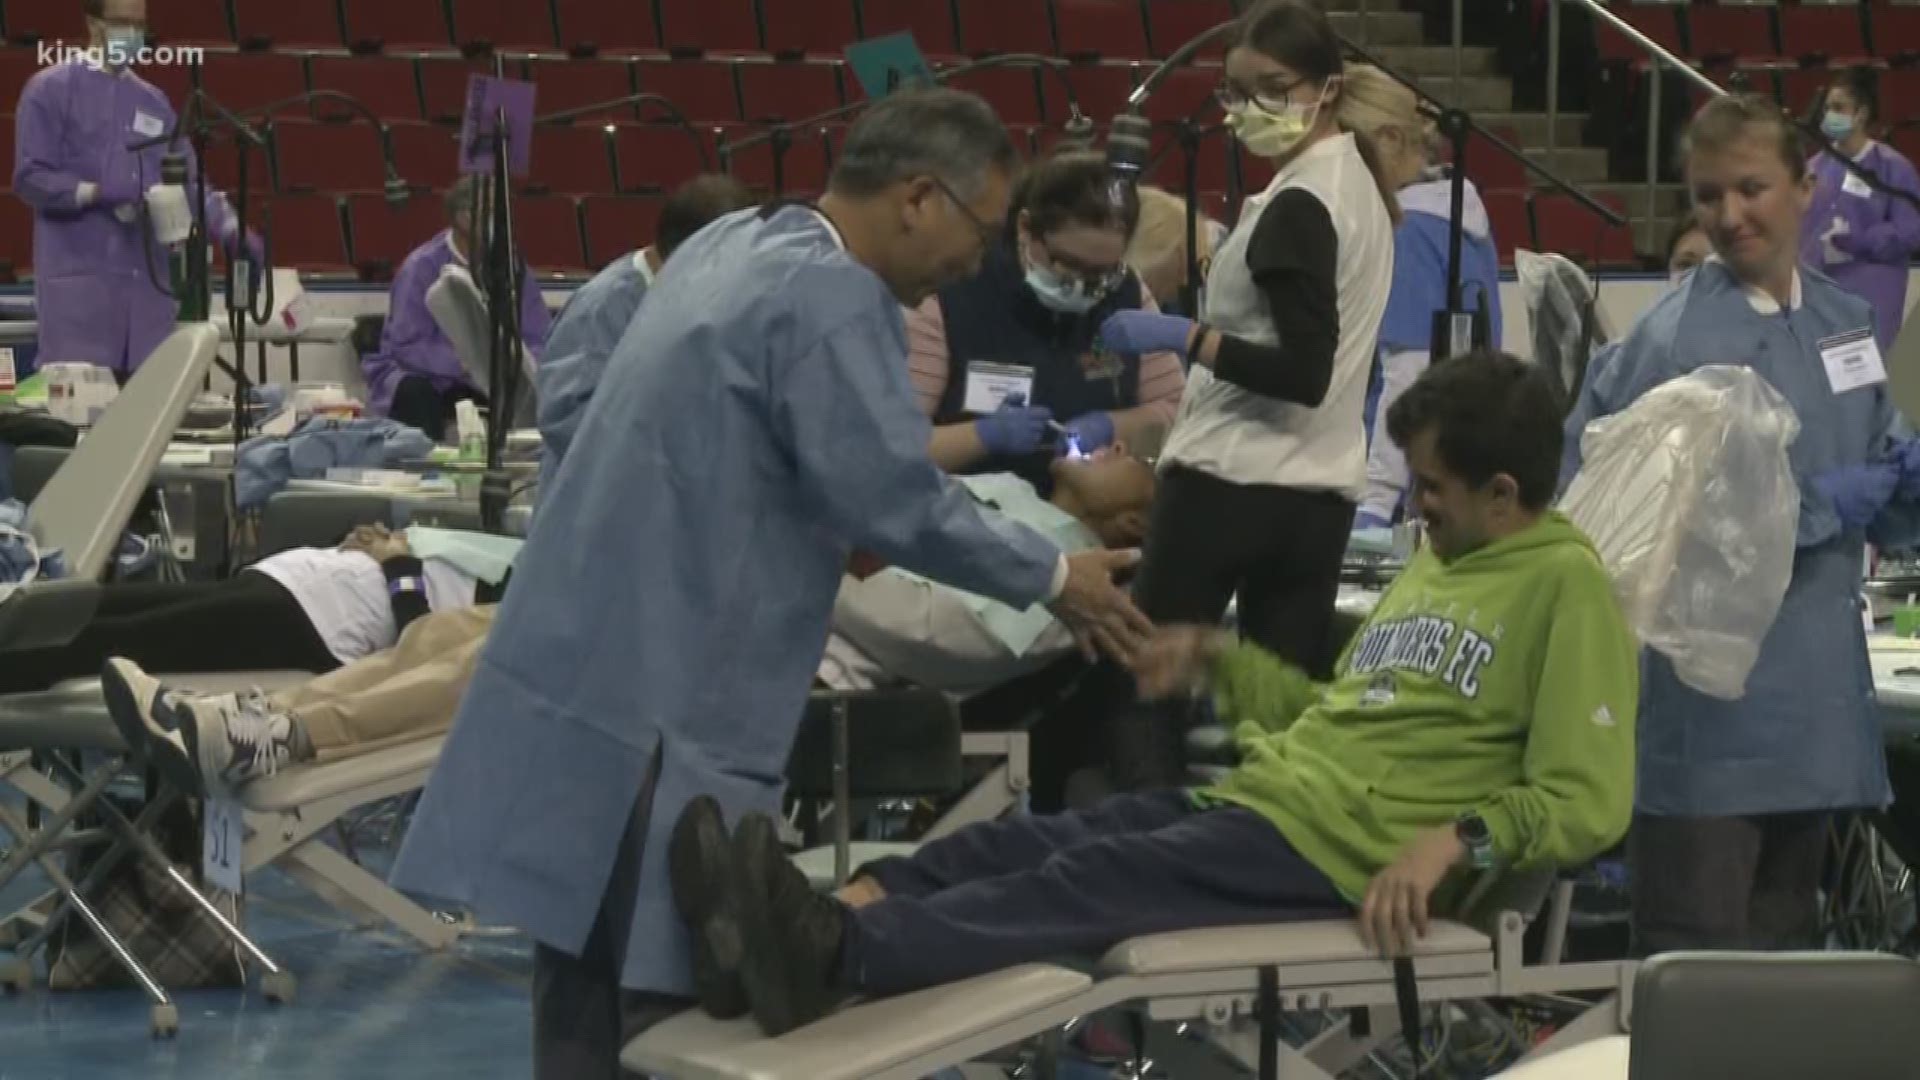 The first come, first serve free clinic hopes to take care of thousands of patients over the weekend.